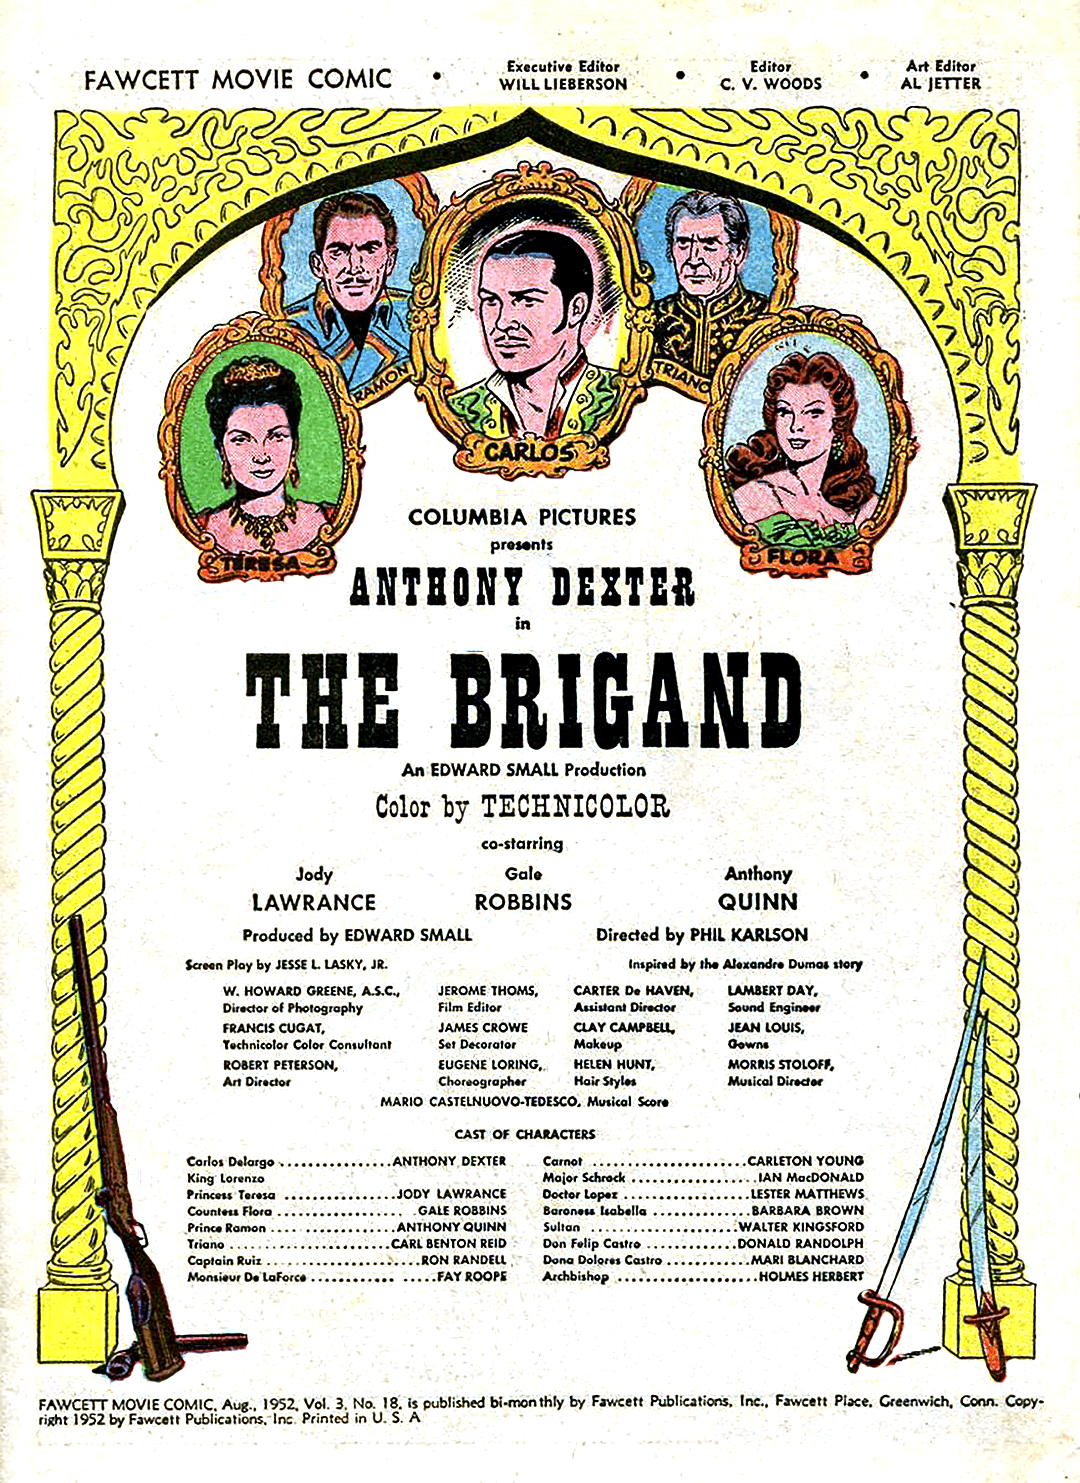 The Brigand #1 image number 1